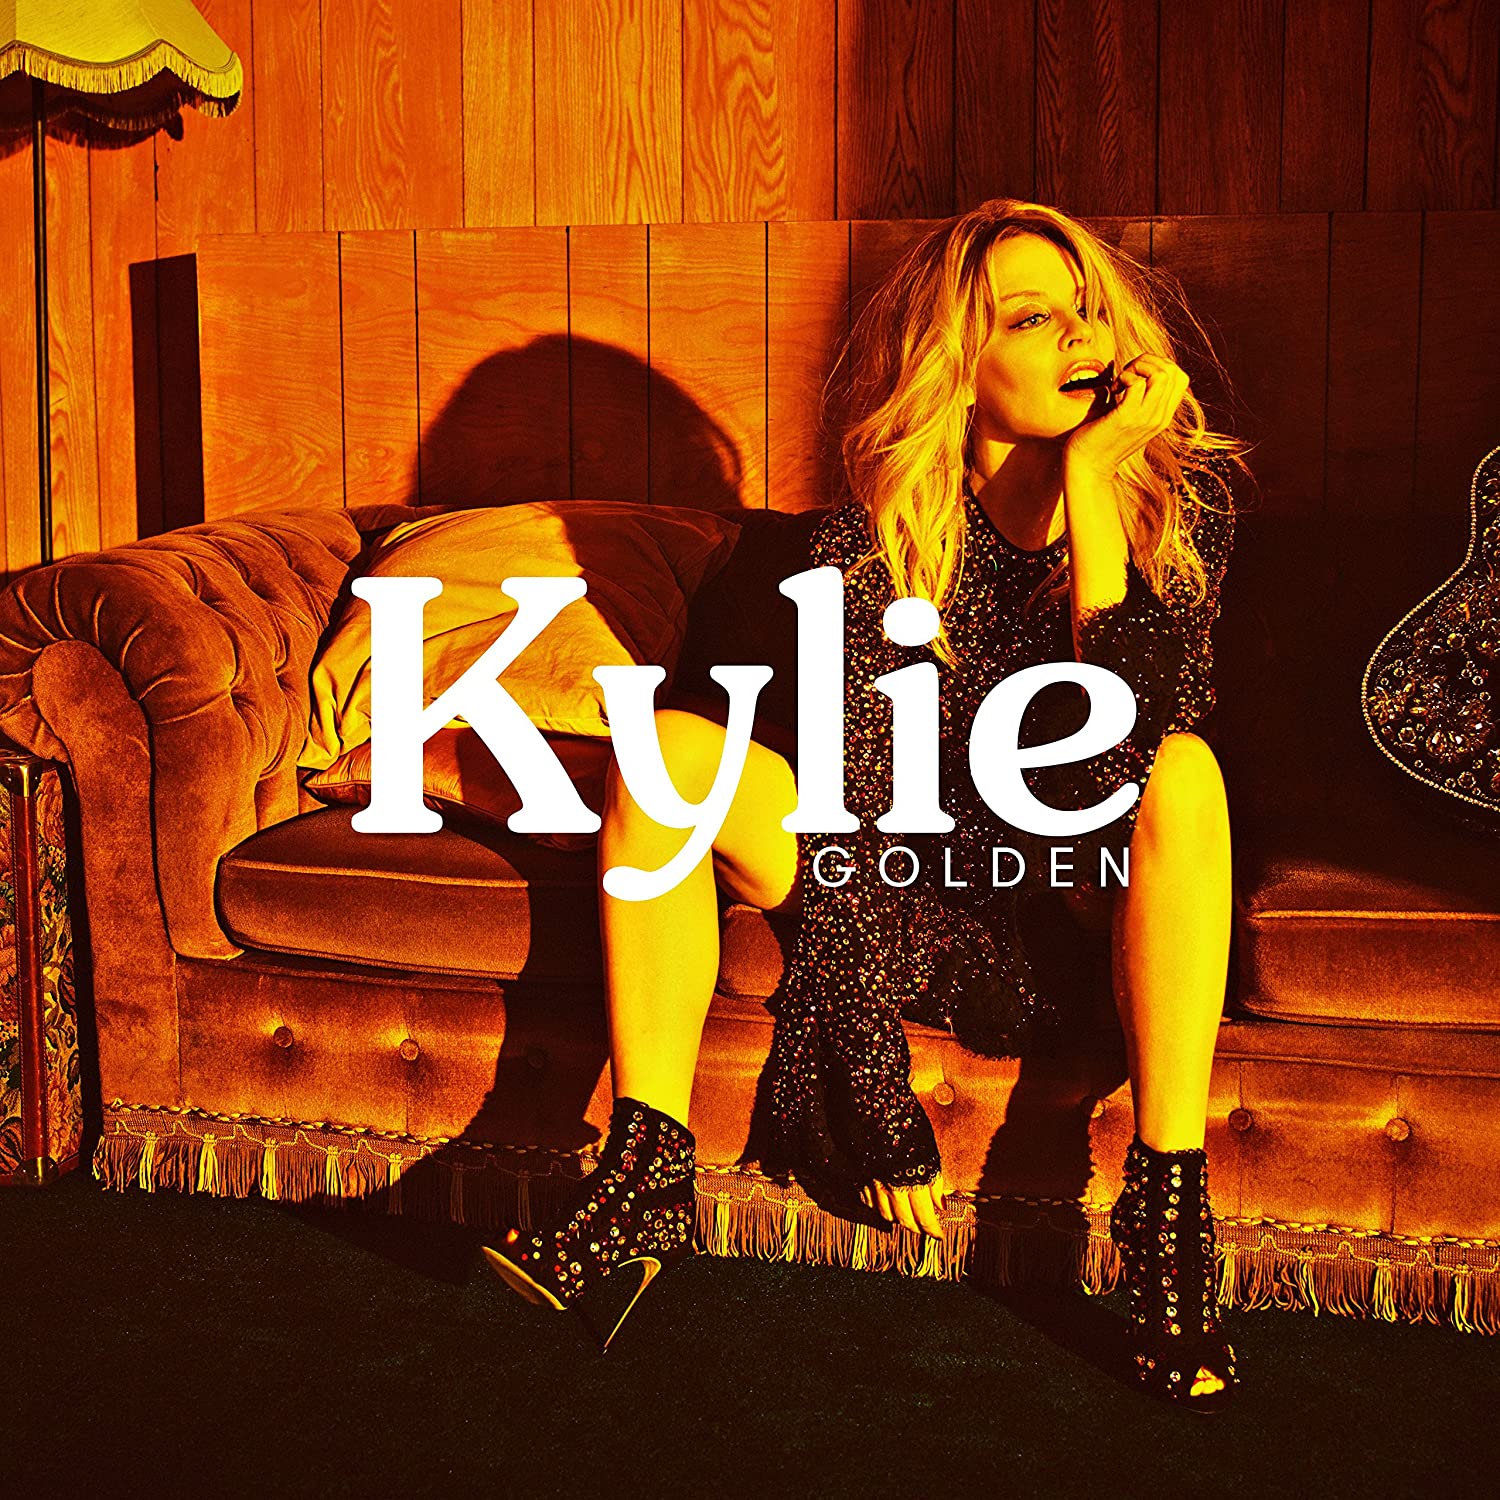 The album artwork for Golden by Kylie Minogue.